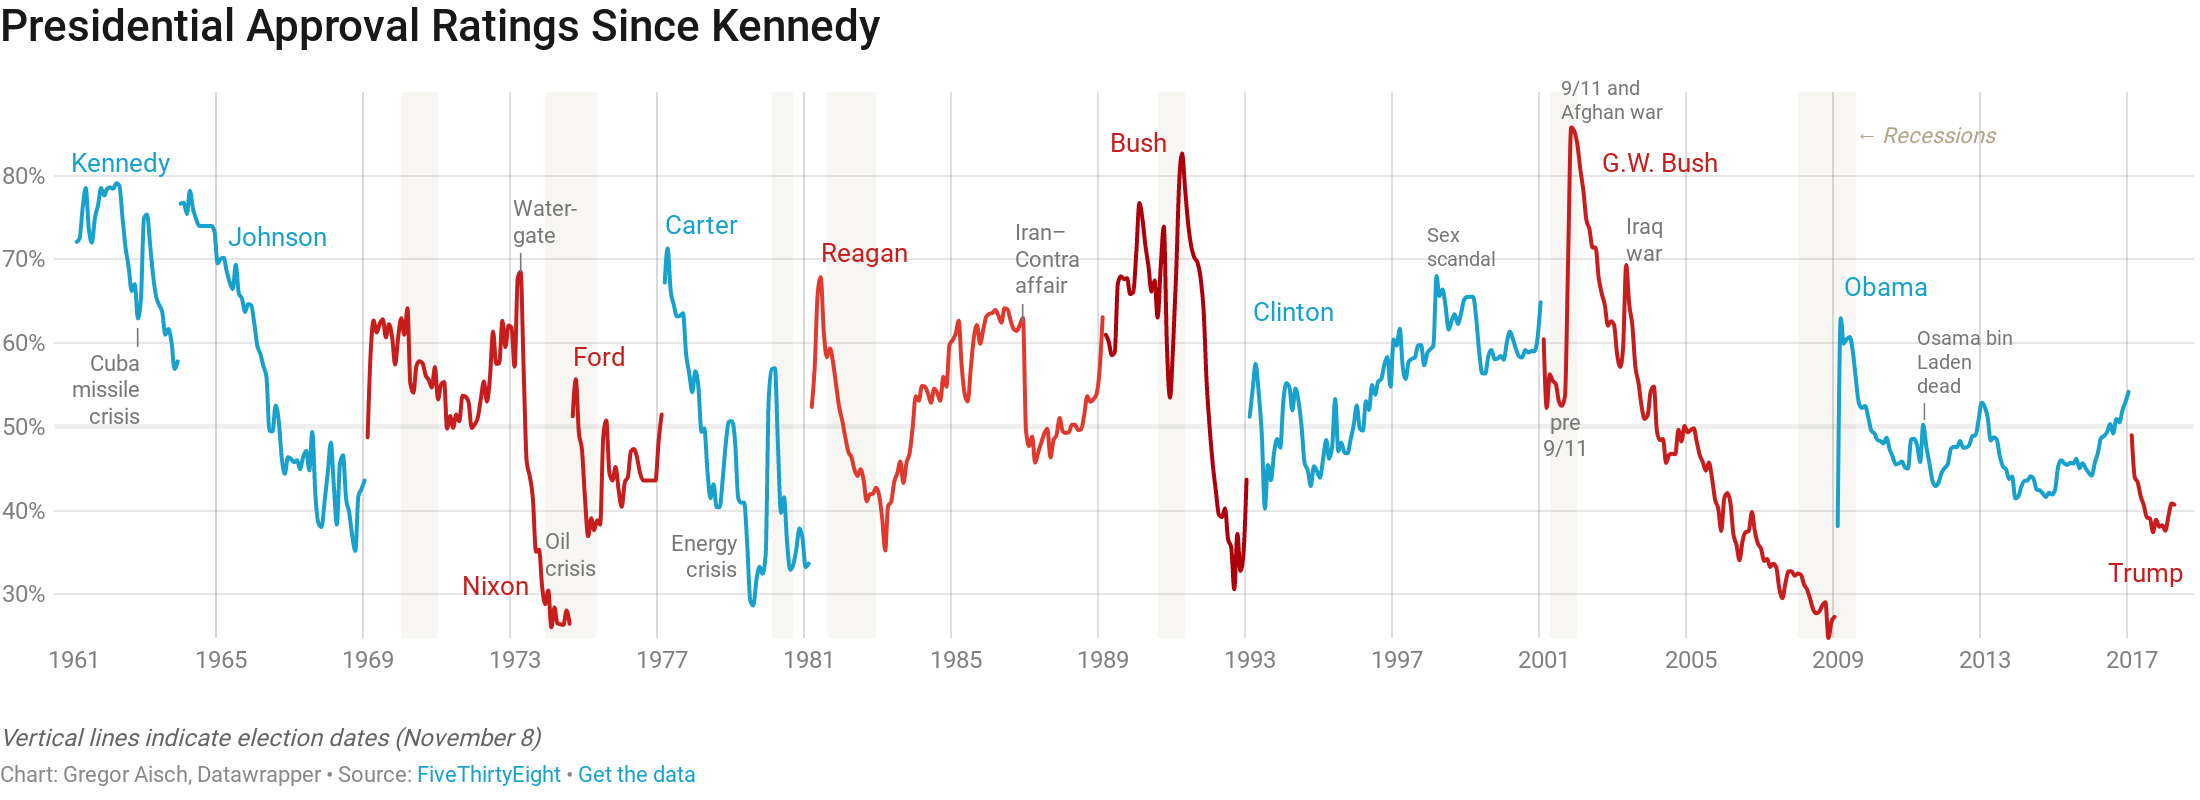 Presidential Approval Ratings Since Kennedy